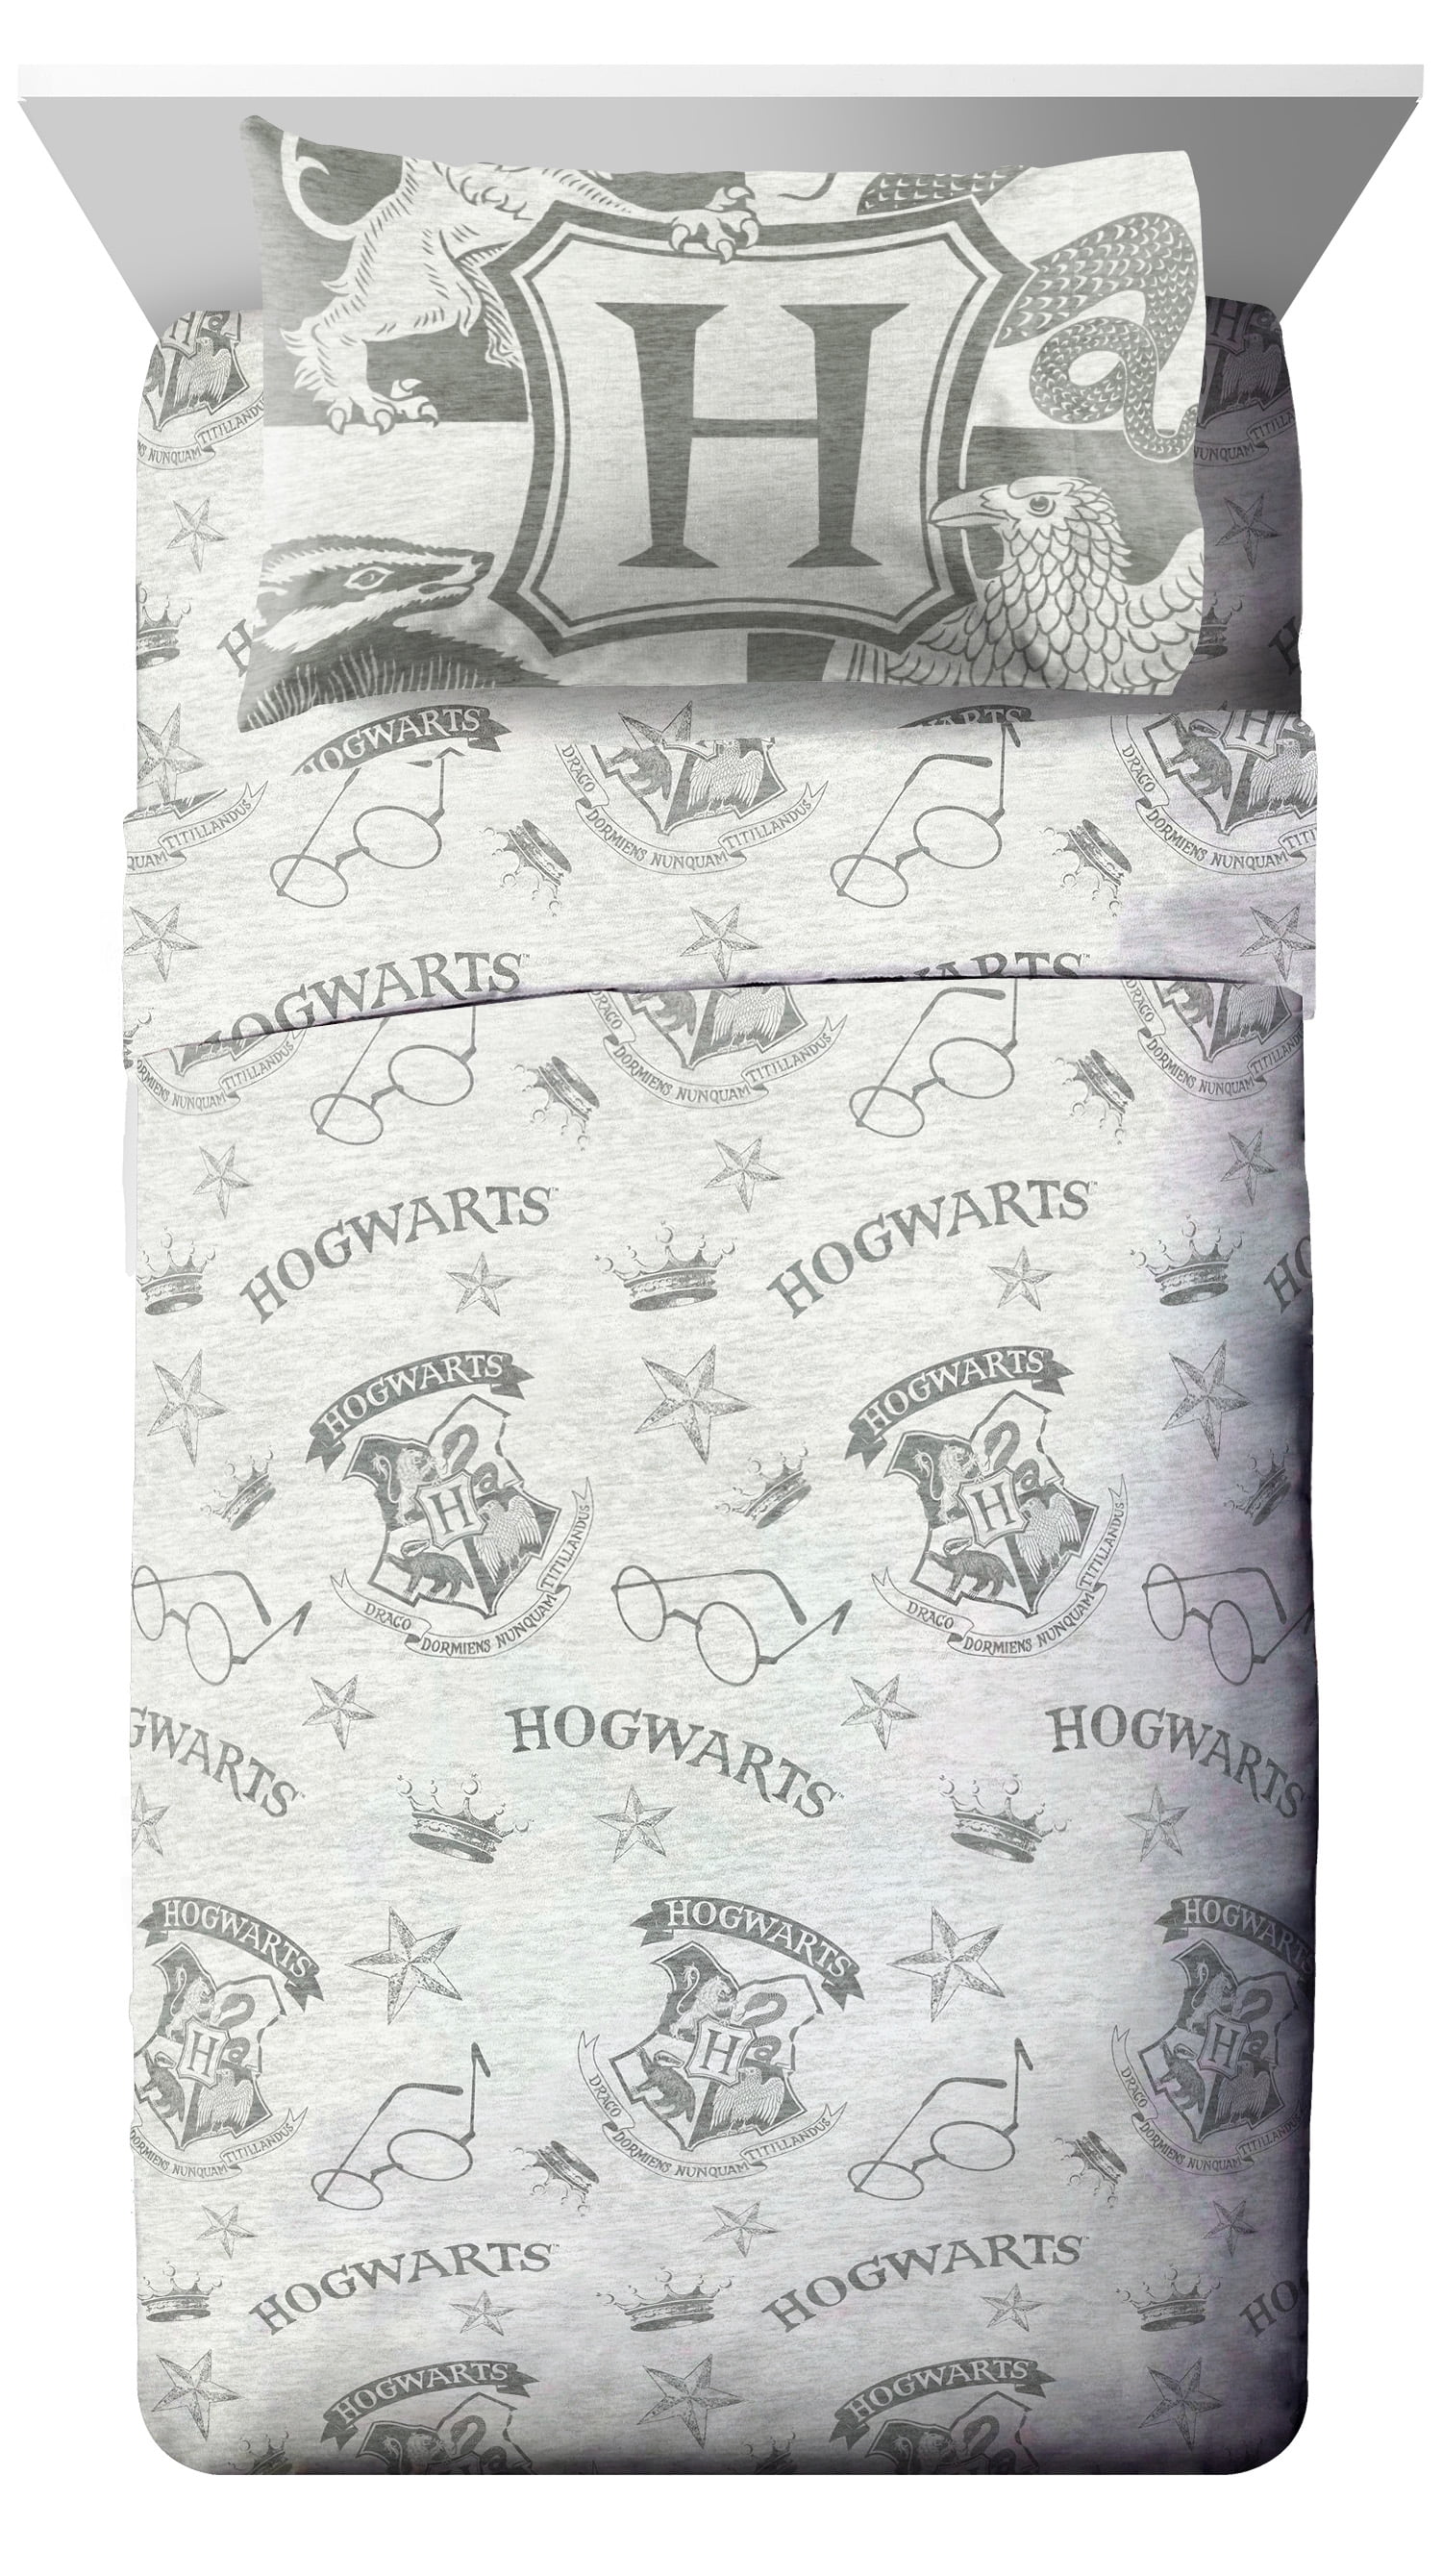 Harry Potter Witchcraft & Wizardry 4 Piece Full Sheet Set by Jay Franco NEW 